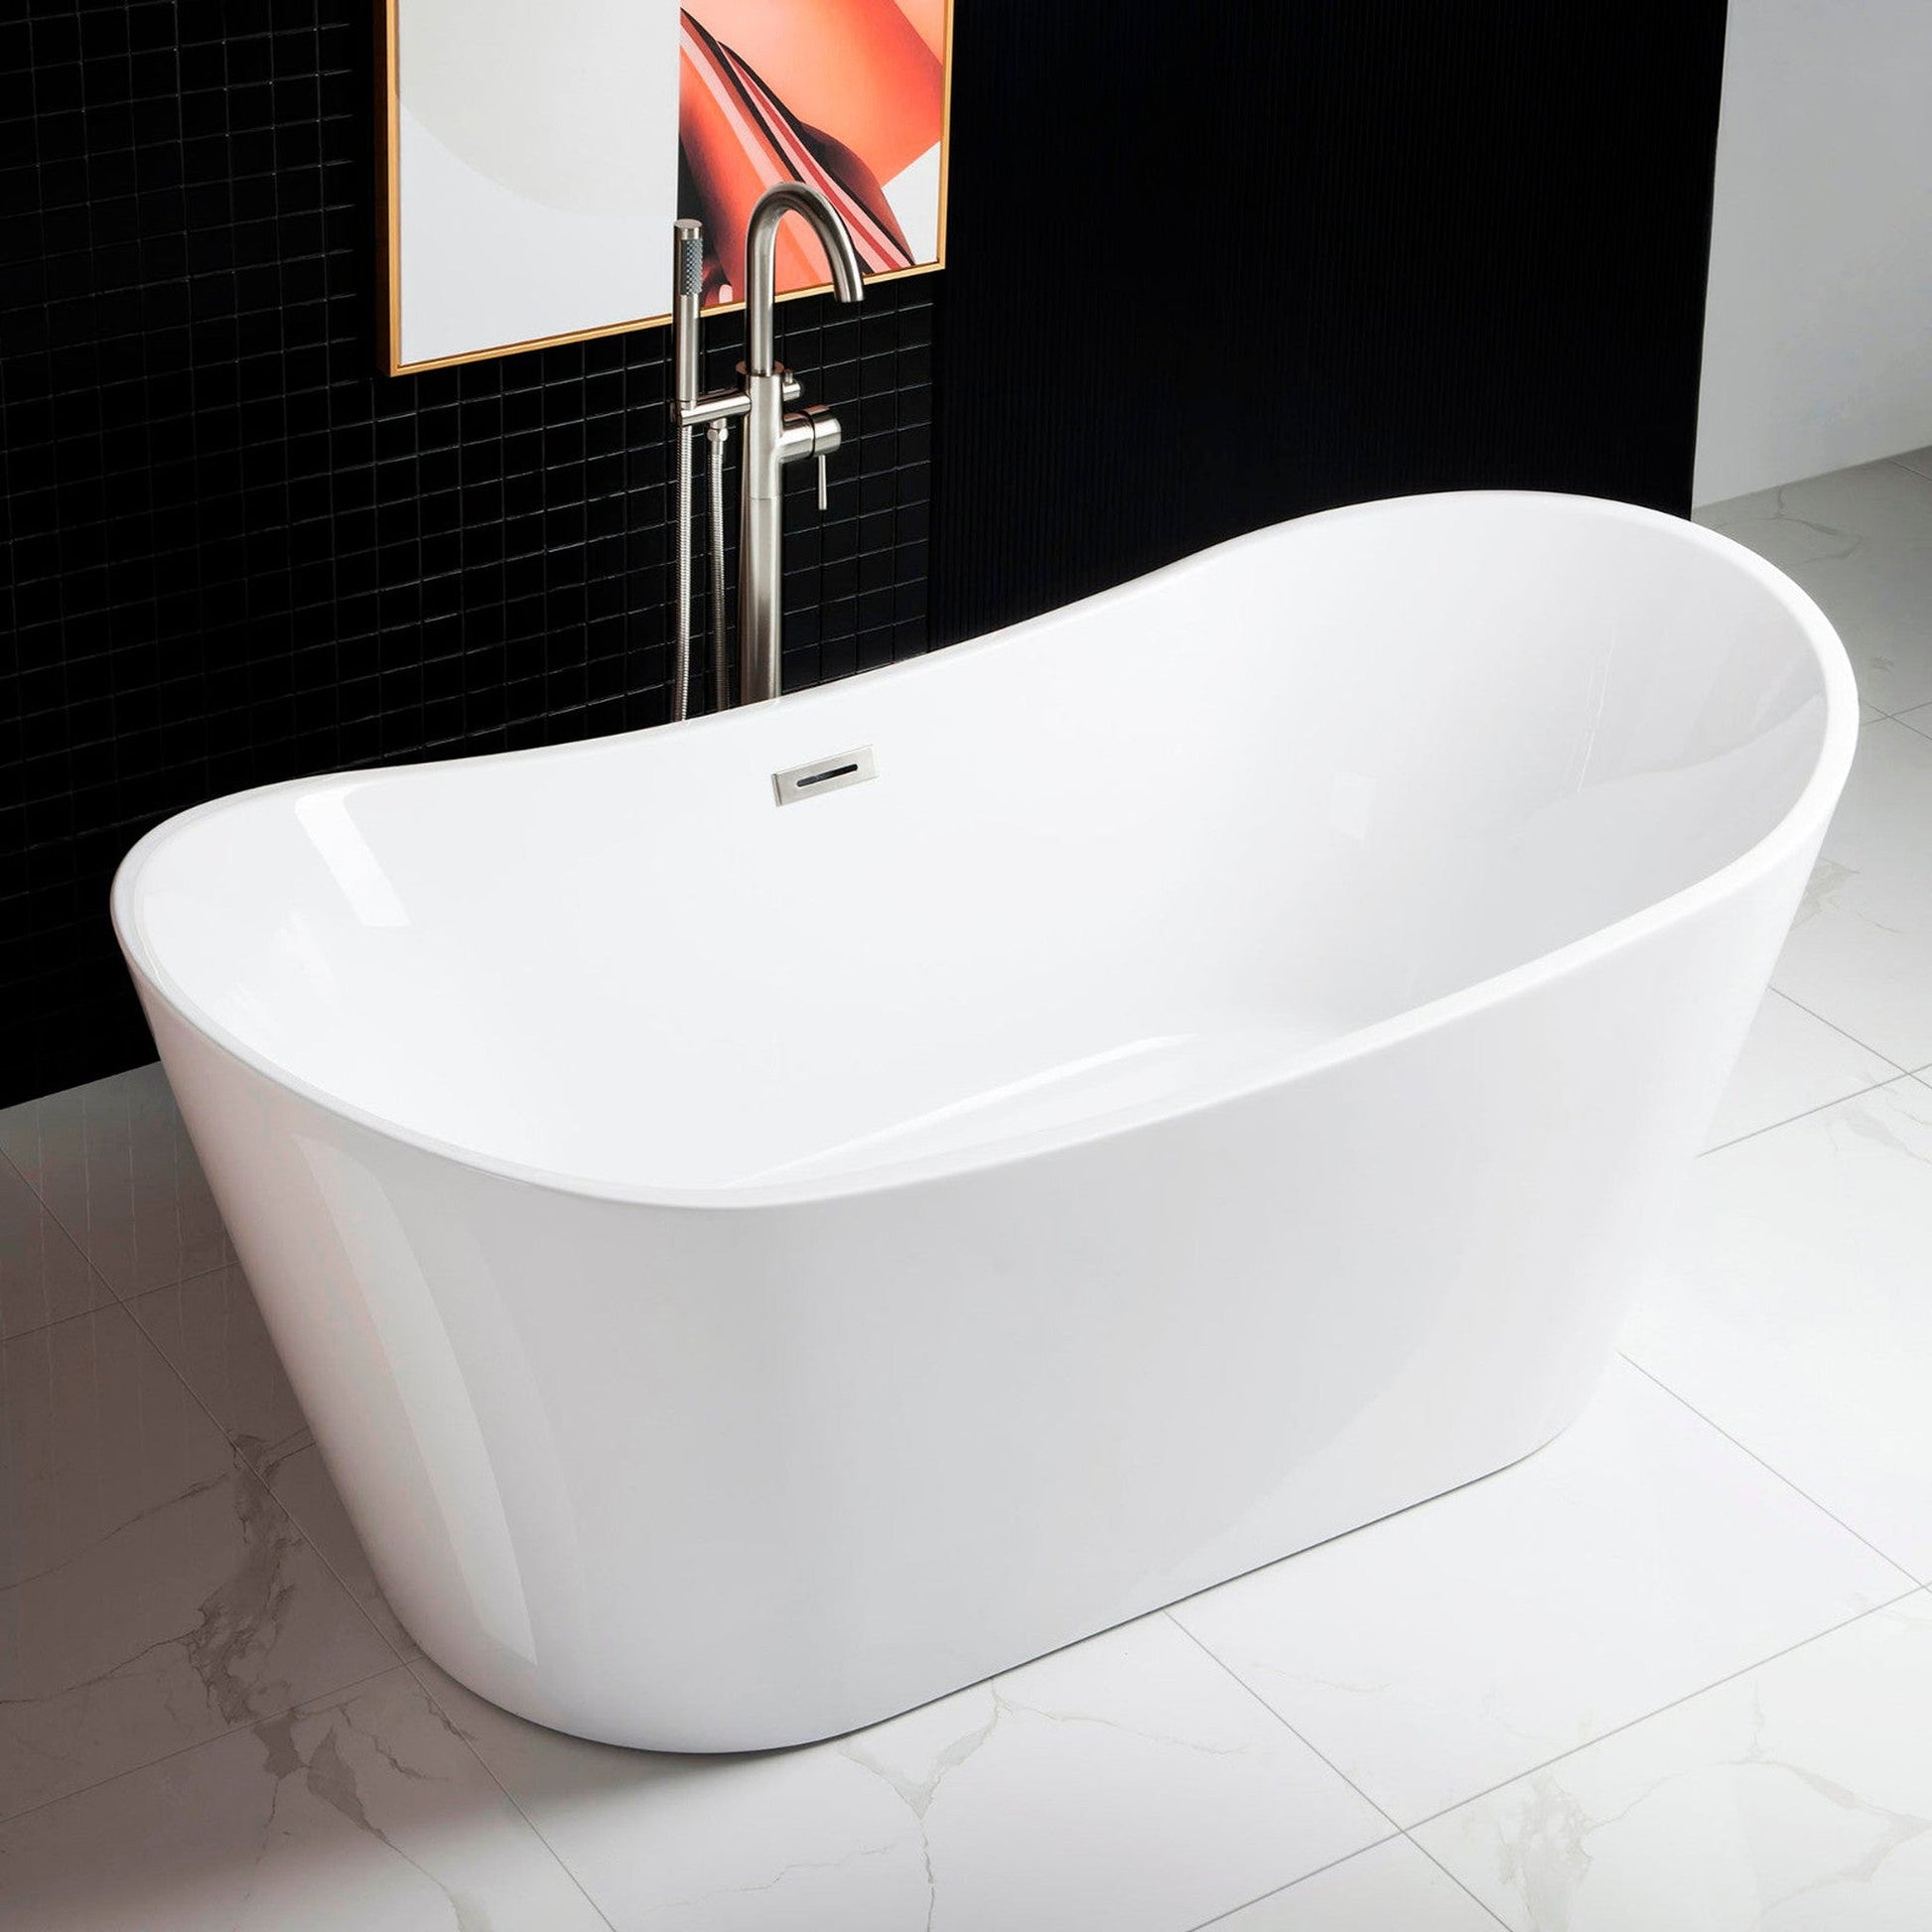 WoodBridge B0010 67" White Acrylic Freestanding Contemporary Soaking Bathtub With Chrome Drain, Overflow, F0071CHRD Tub Filler and Caddy Tray